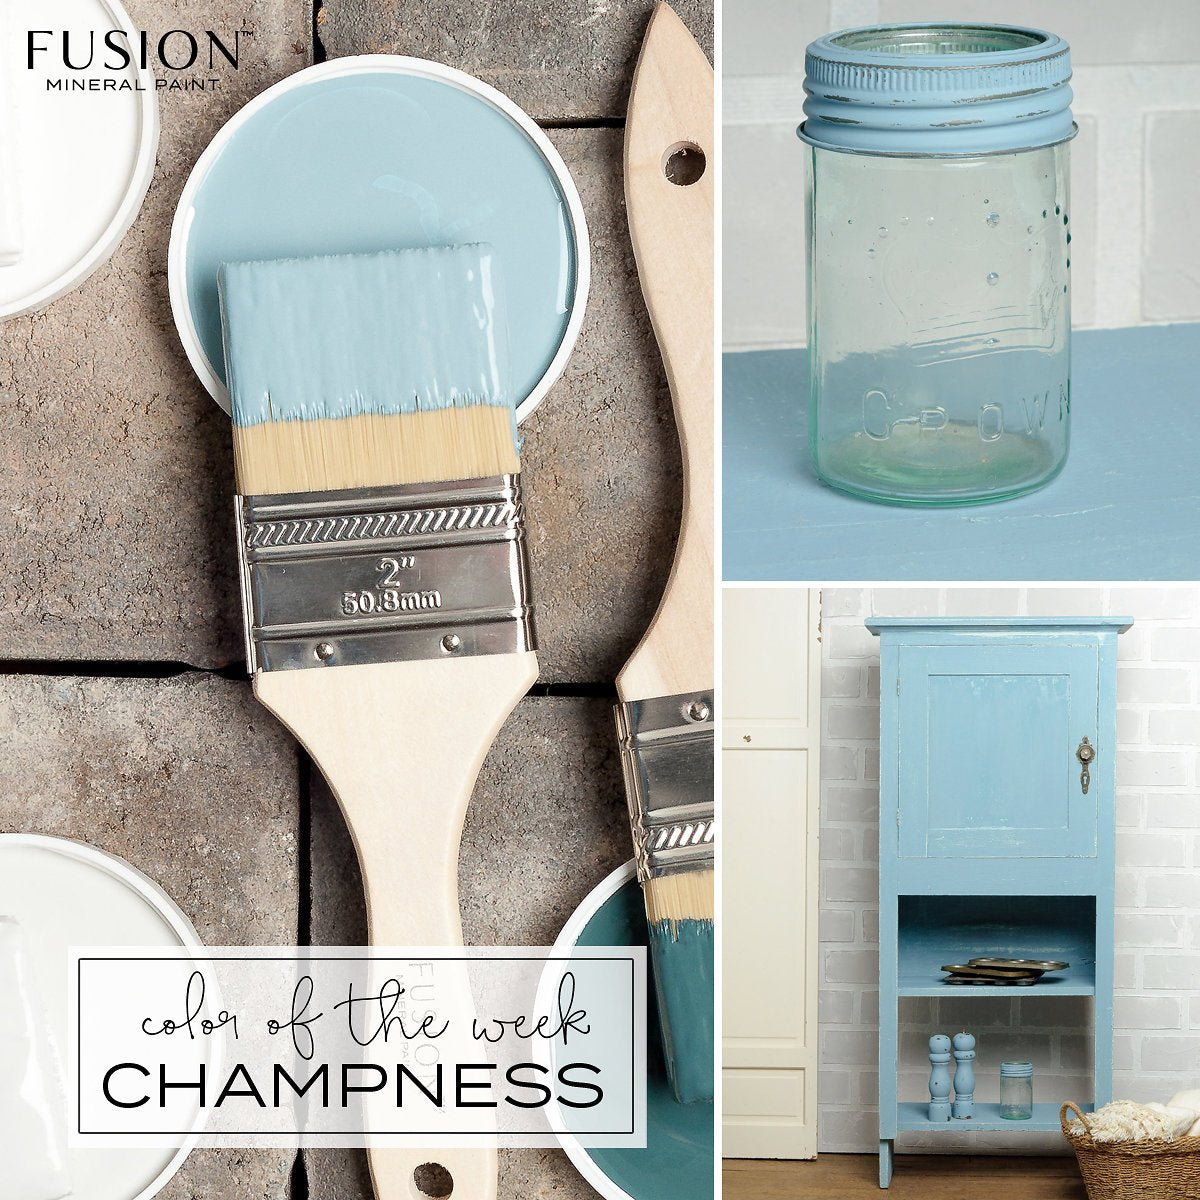 Champness – Fusion Mineral Paint